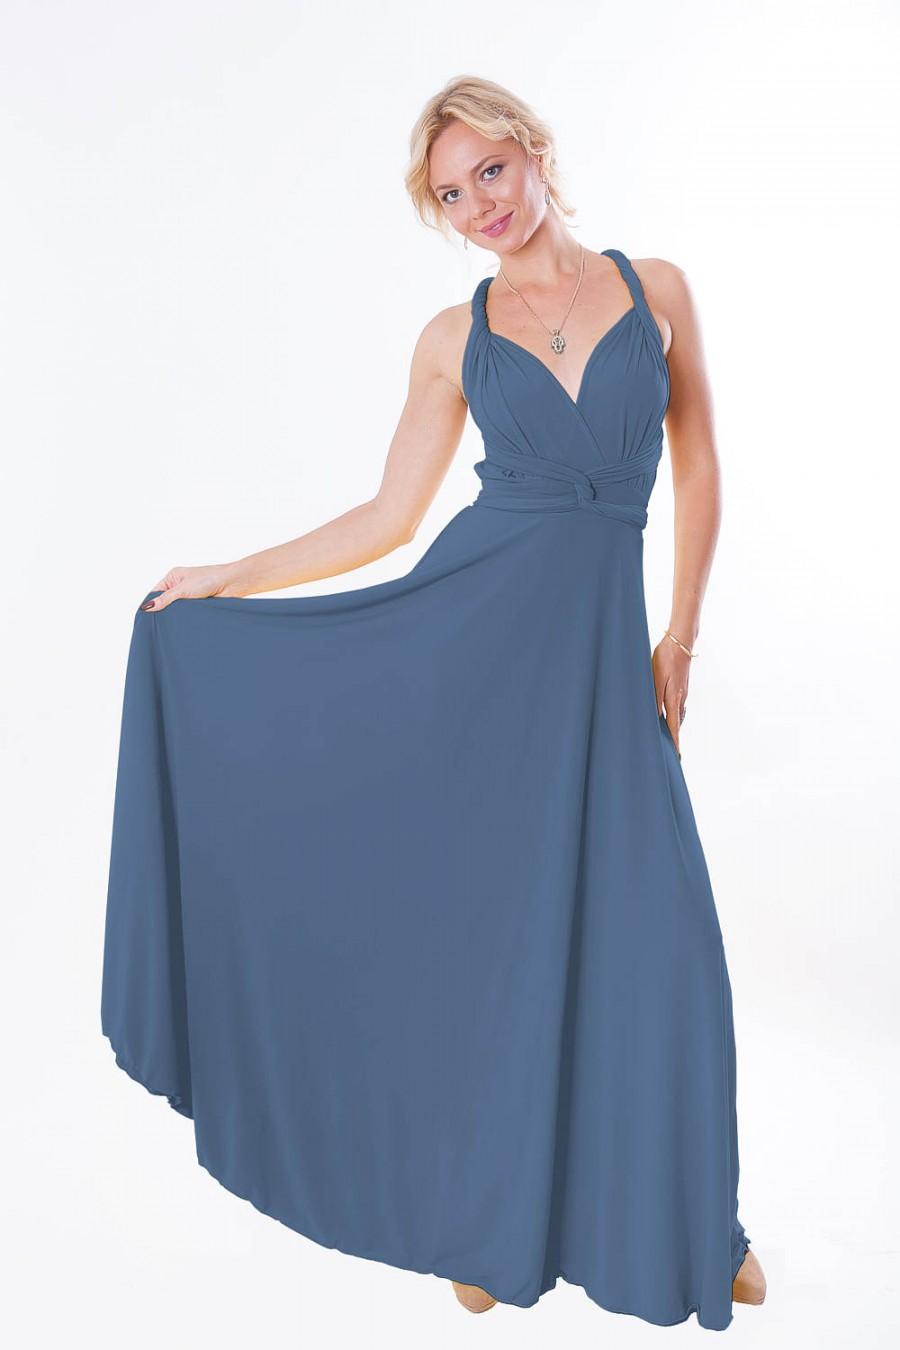 Hochzeit - Convertible/Infinity Dress - floor length with long straps  in jeans color wrap dress